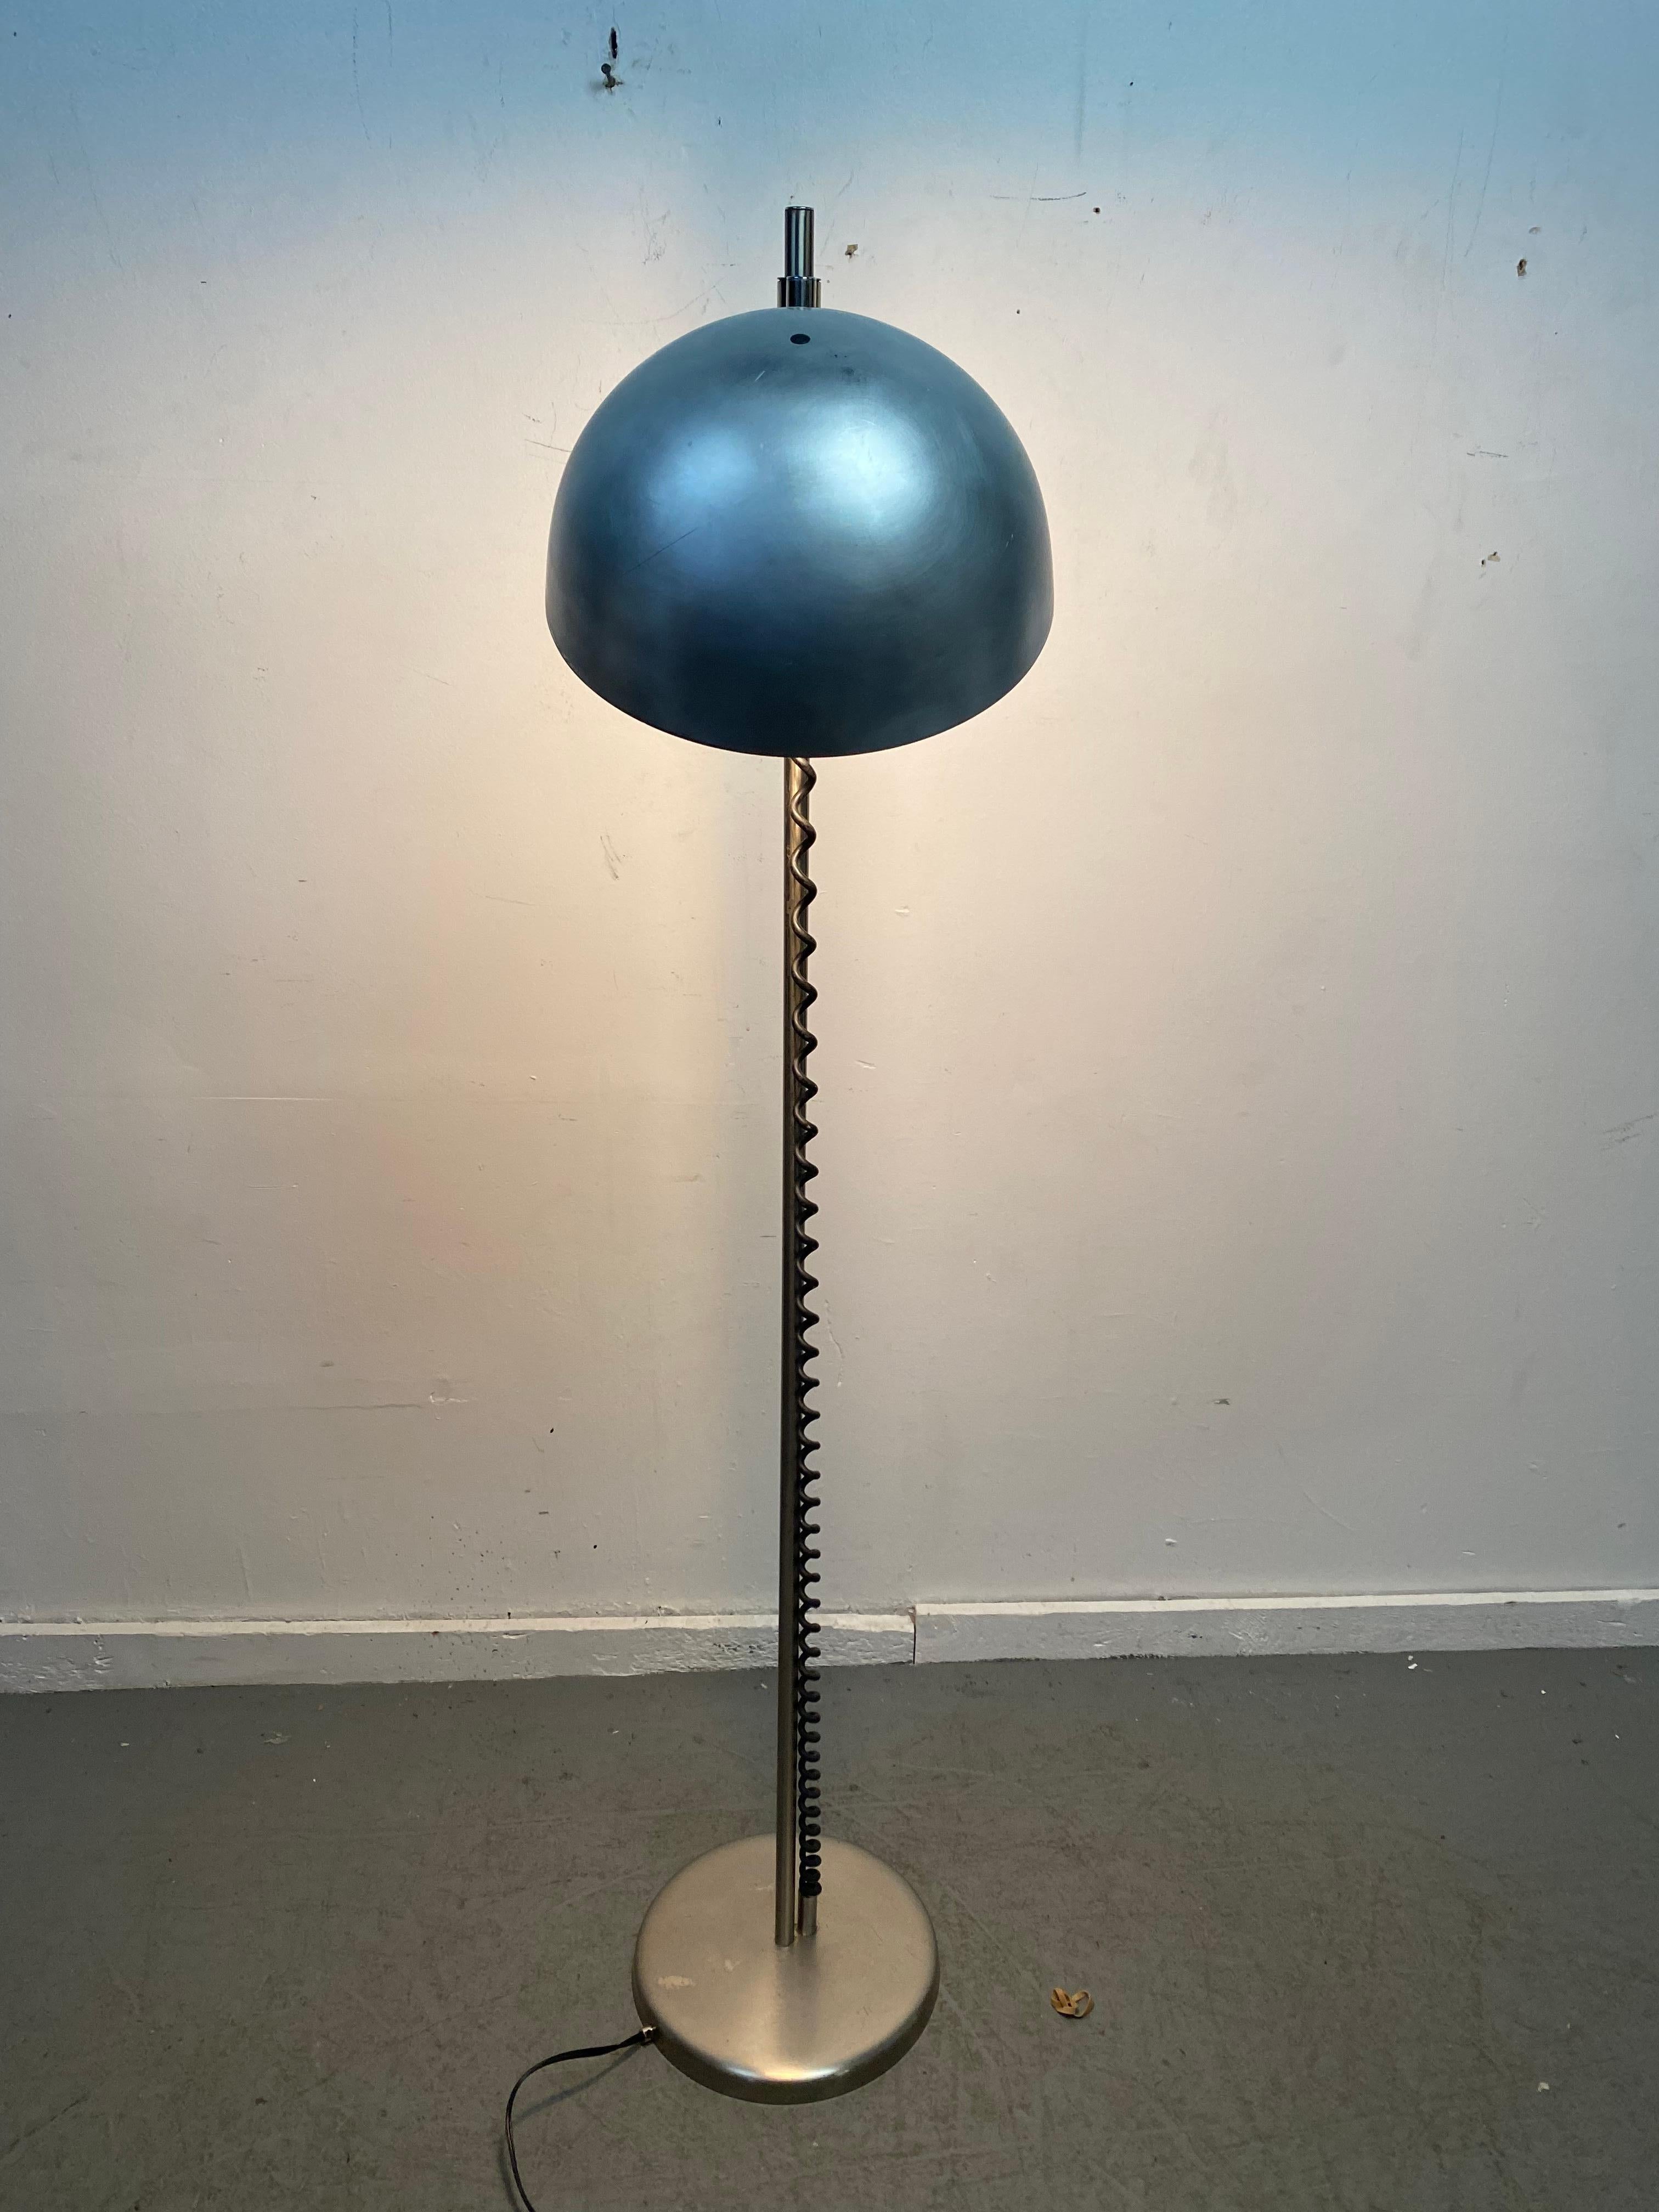 Unusual 1970s Bauhaus Inspired Adjustable Floor Lamp, Spun Aluminum Shade In Good Condition For Sale In Buffalo, NY